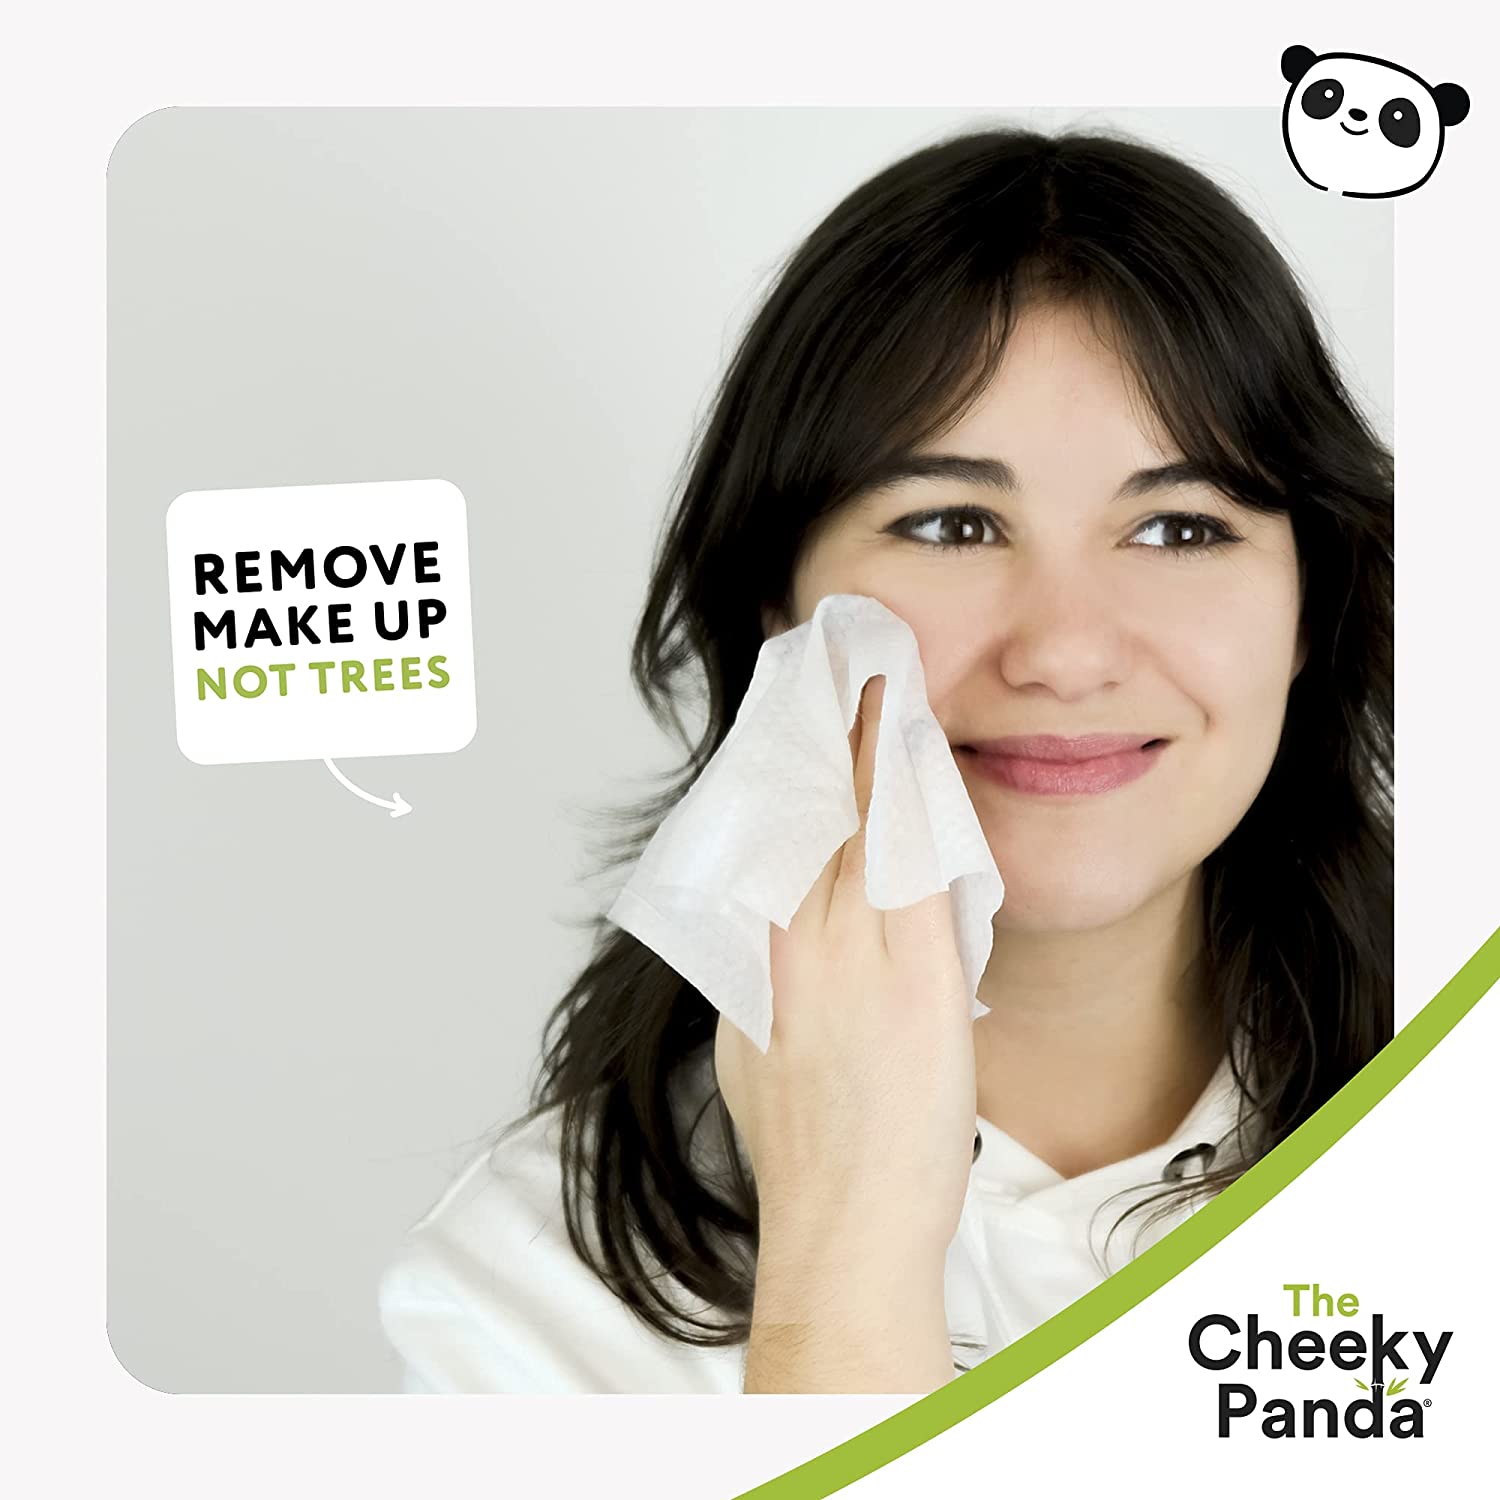 Rose Scented Bamboo Facial Cleansing Wipes 25wipes